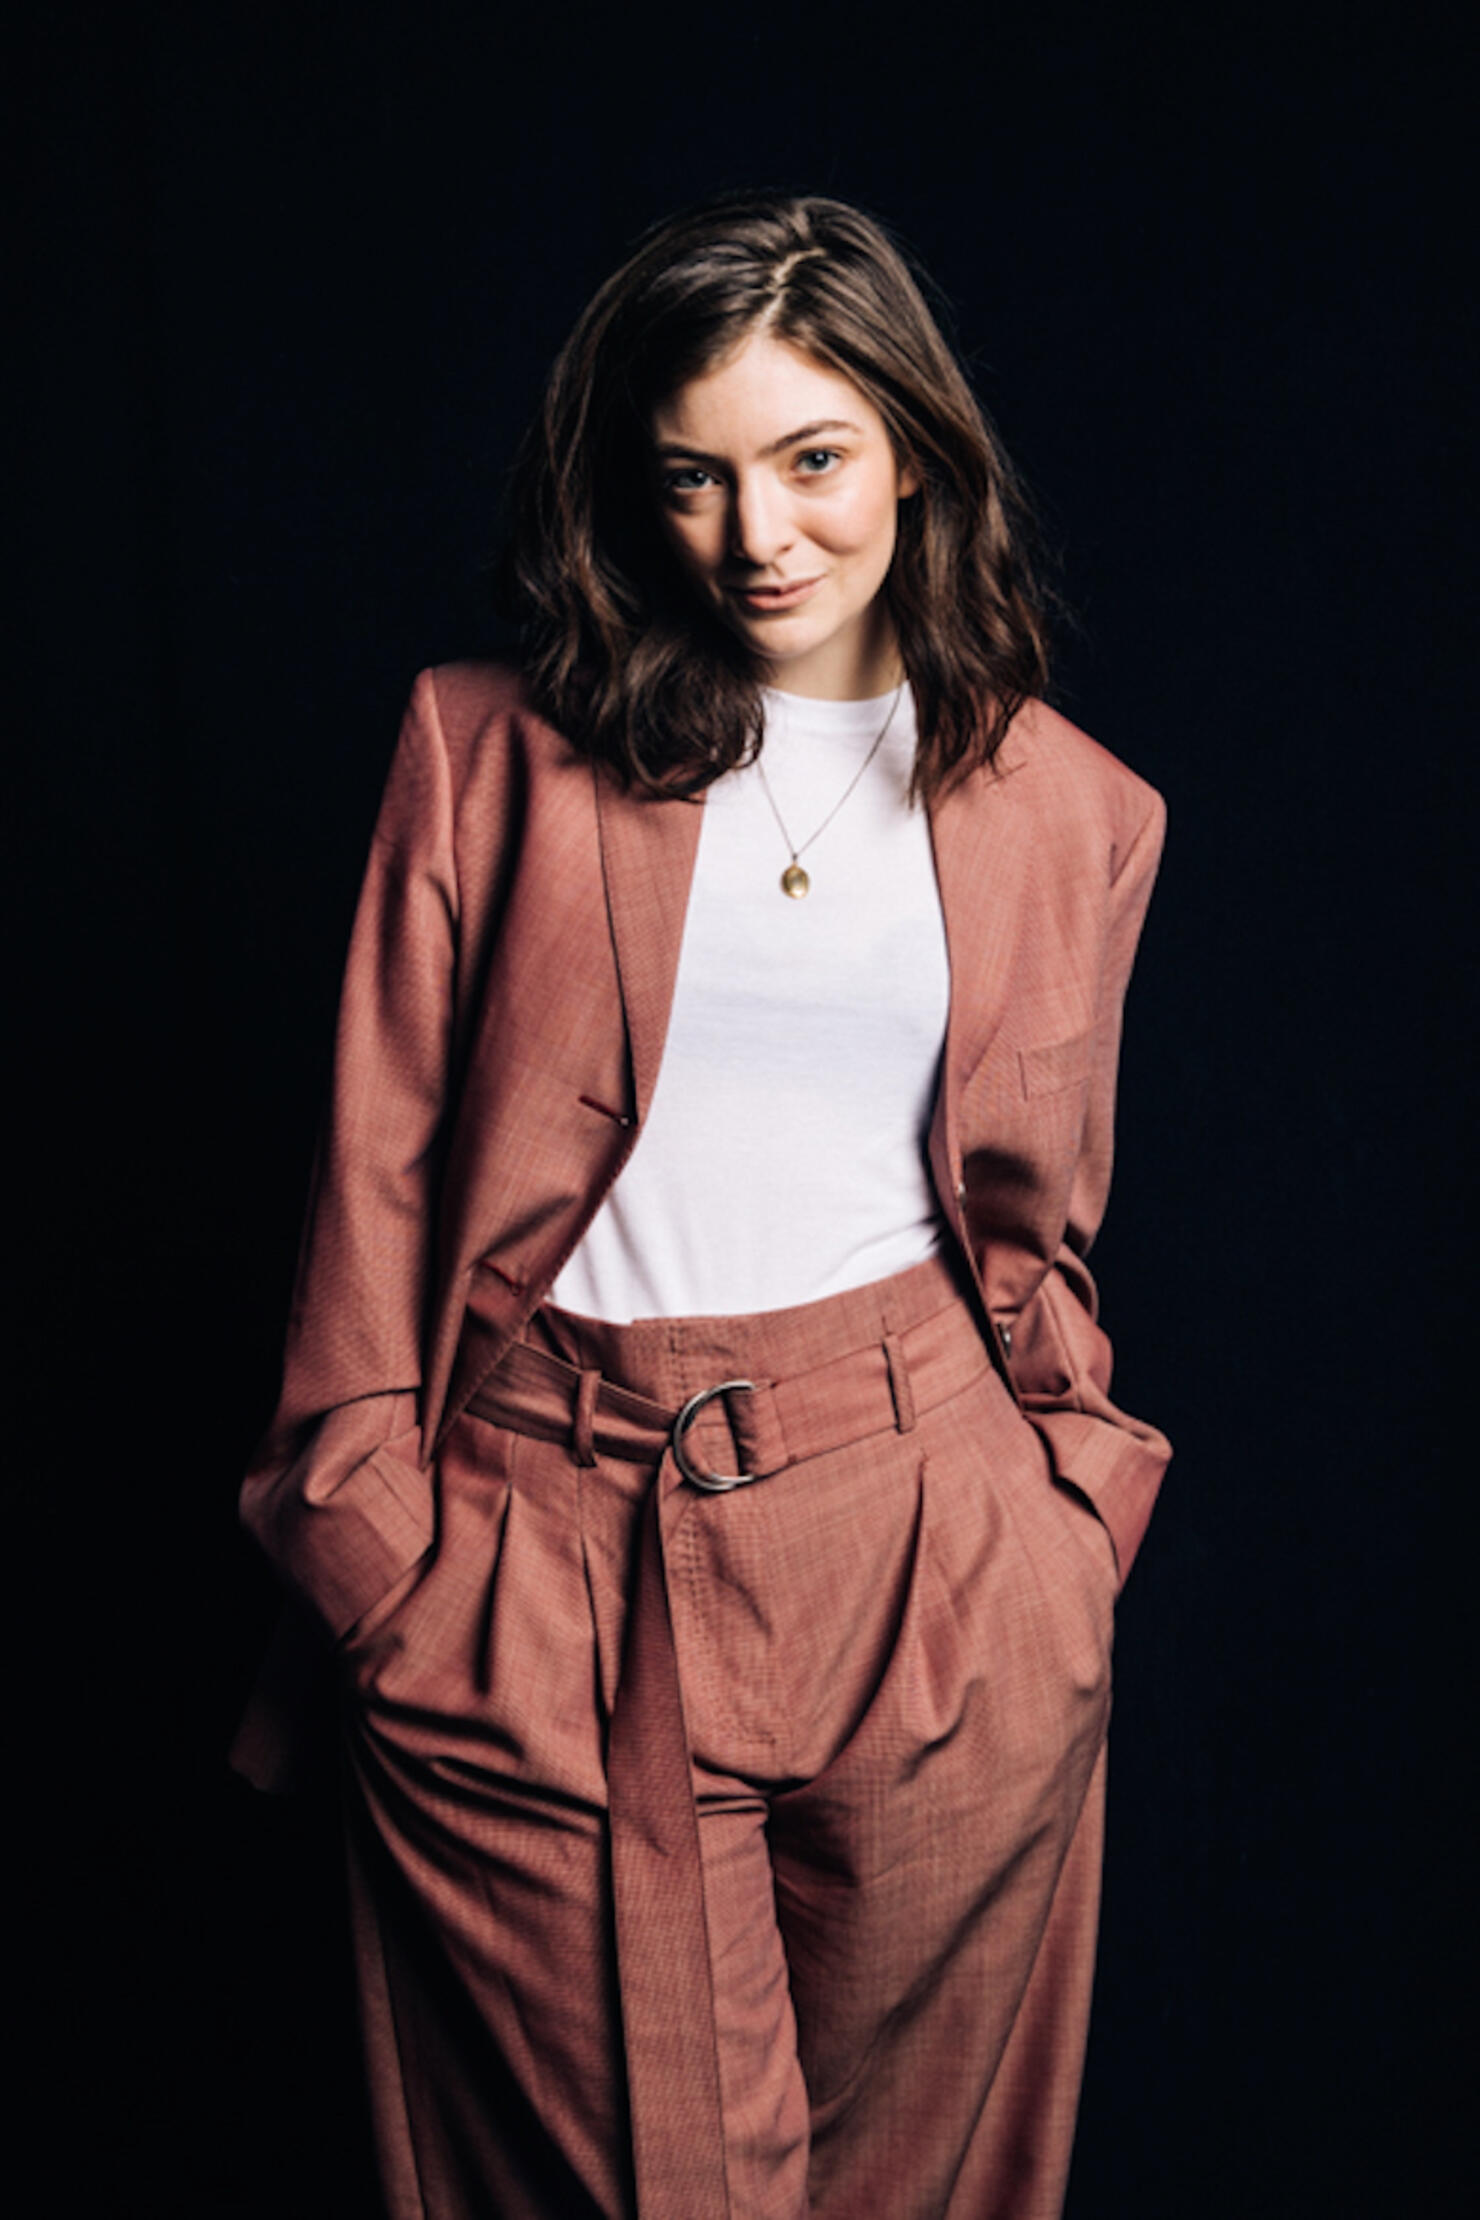 Lorde Interview Photoshoot at iHeartRadio